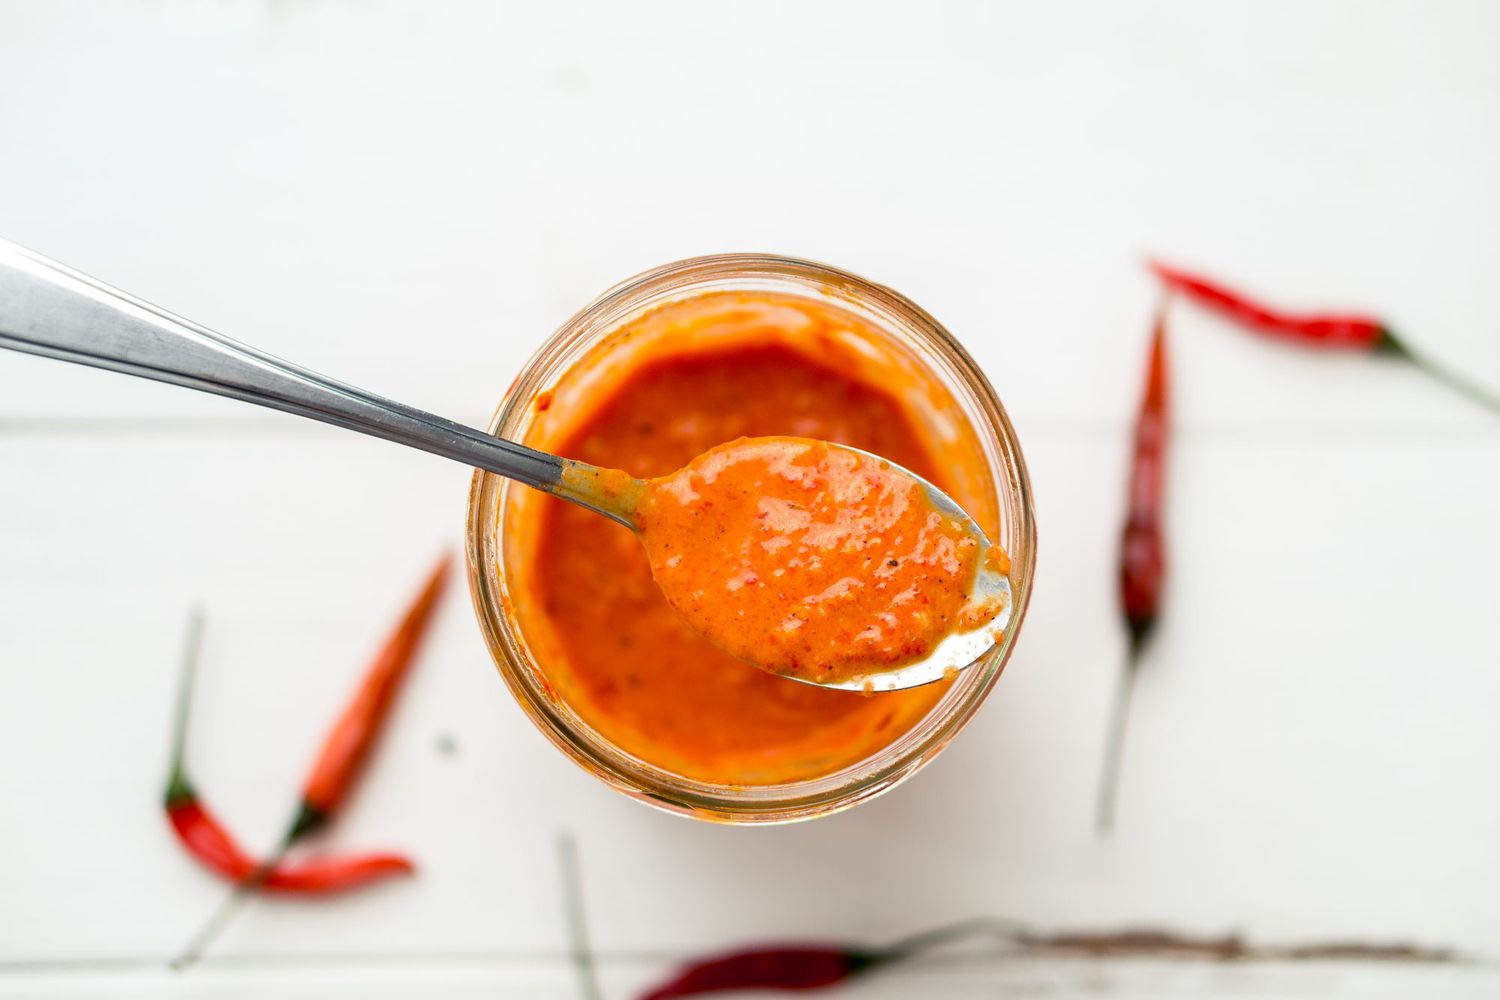 Piri piri sauce is a type of hot chilli pepper sauce used as seasoning or marinade traditionally in portuguese cuisine. Seen here in a glass jar with a spoon, on a white background.